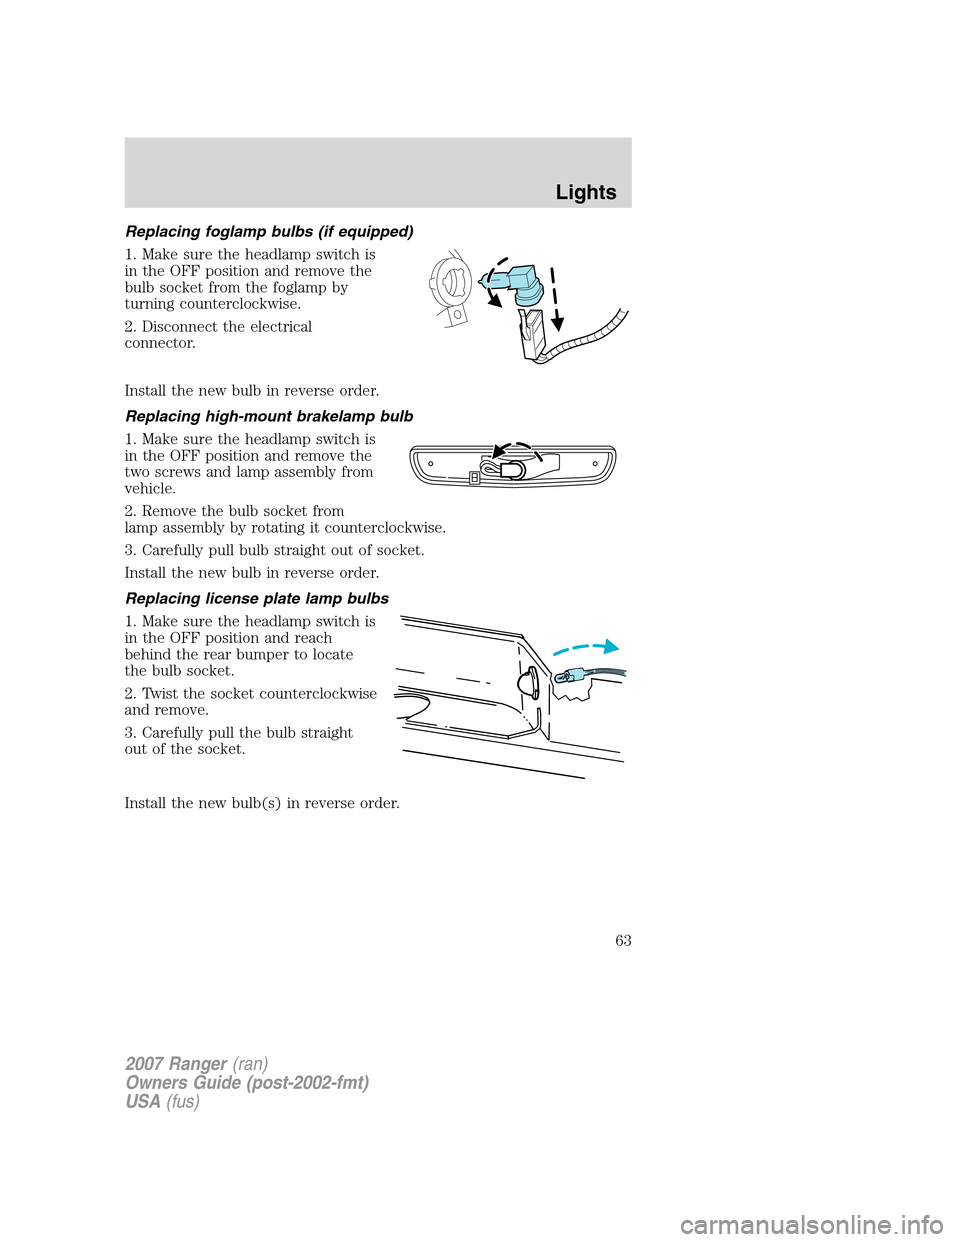 FORD RANGER 2007 2.G User Guide Replacing foglamp bulbs (if equipped)
1. Make sure the headlamp switch is
in the OFF position and remove the
bulb socket from the foglamp by
turning counterclockwise.
2. Disconnect the electrical
conn